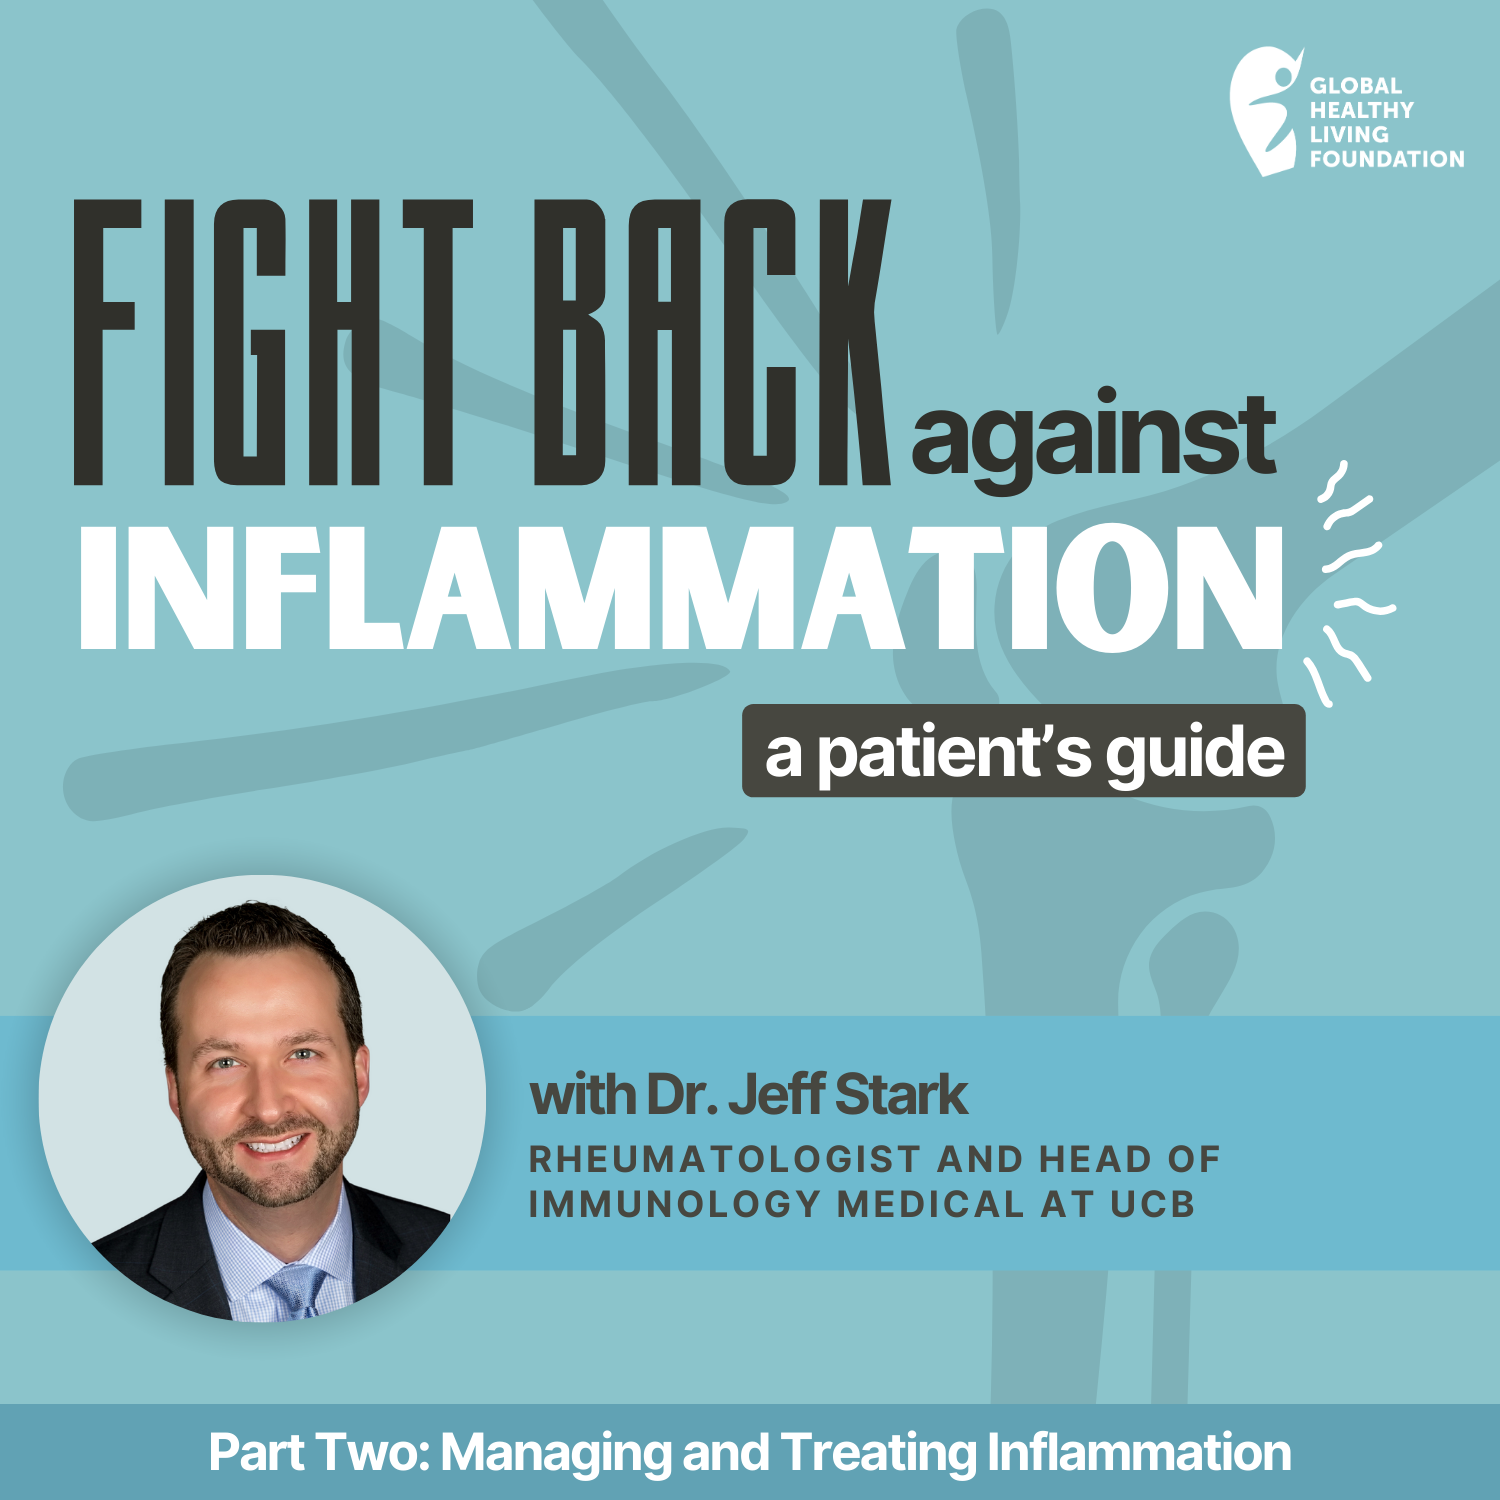 Part Two: Managing and Treating Inflammation